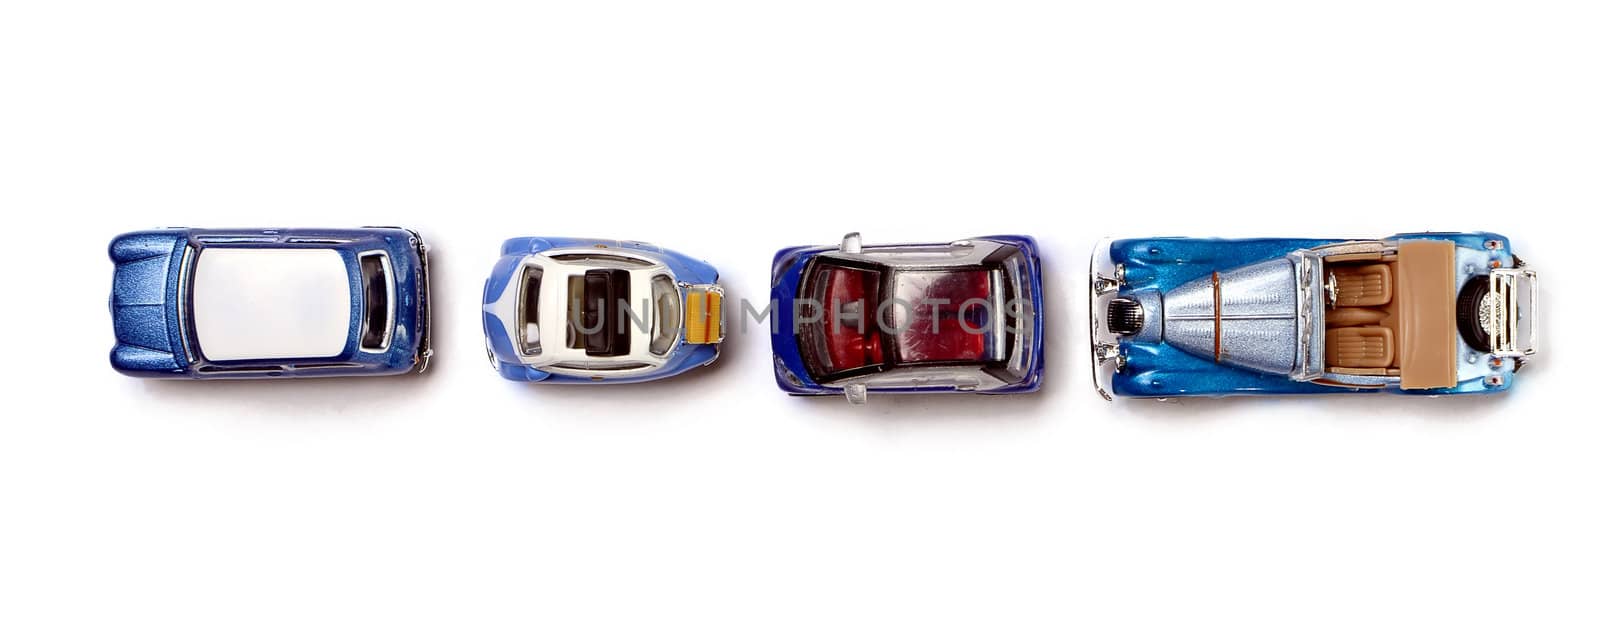 four miniature cars from the top isolated on white by dmitrimaruta